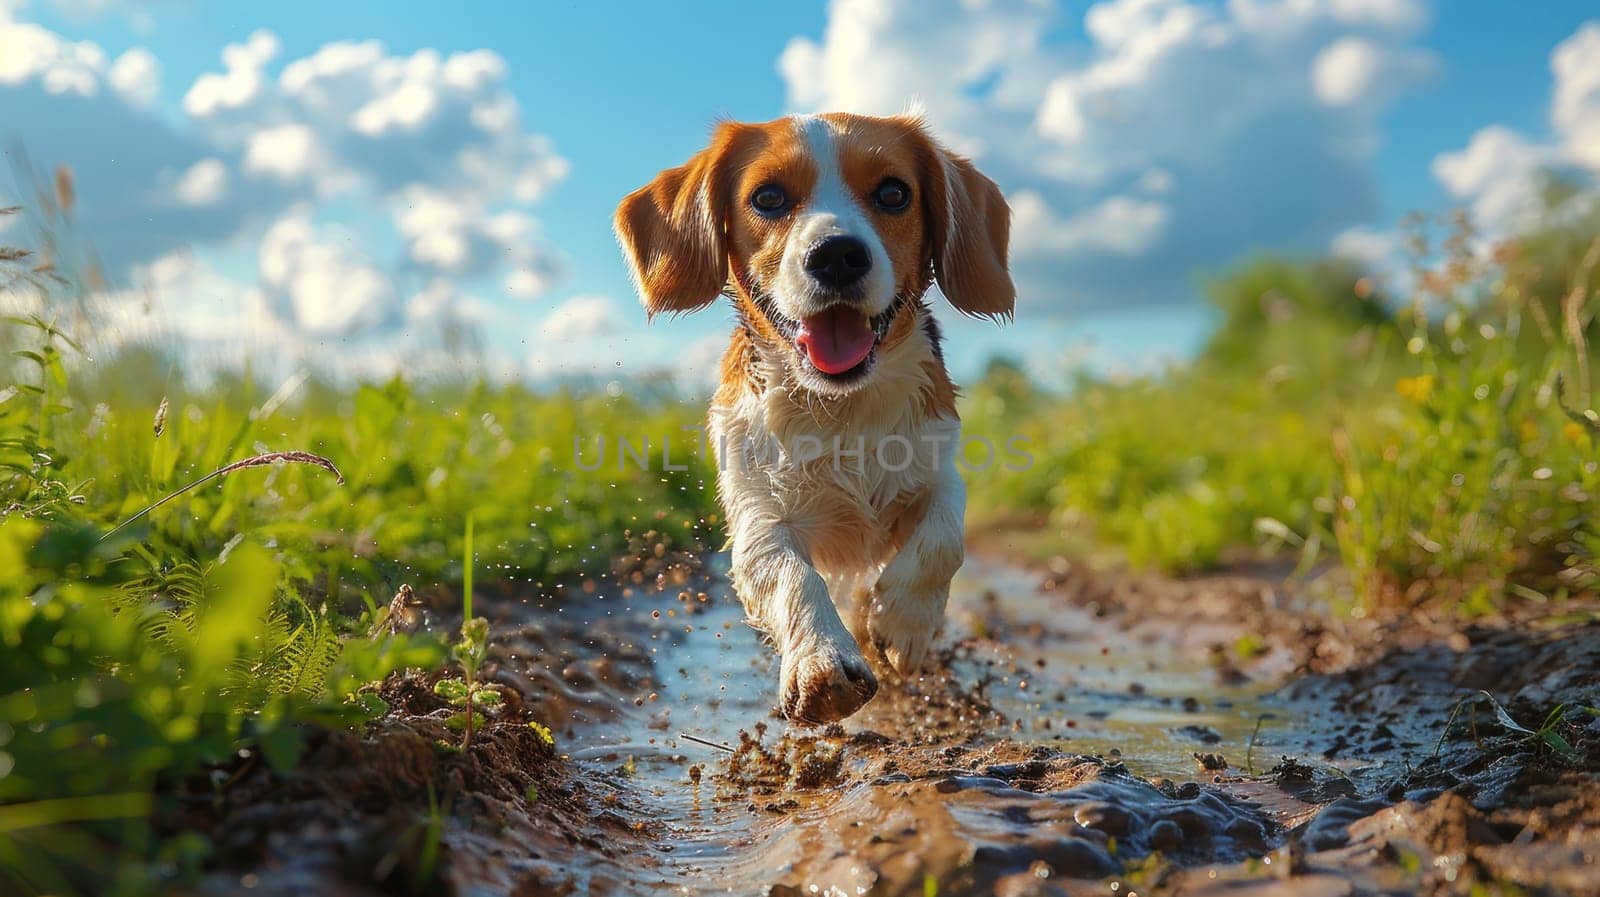 A dog is running through mud and water, with its tongue out by golfmerrymaker